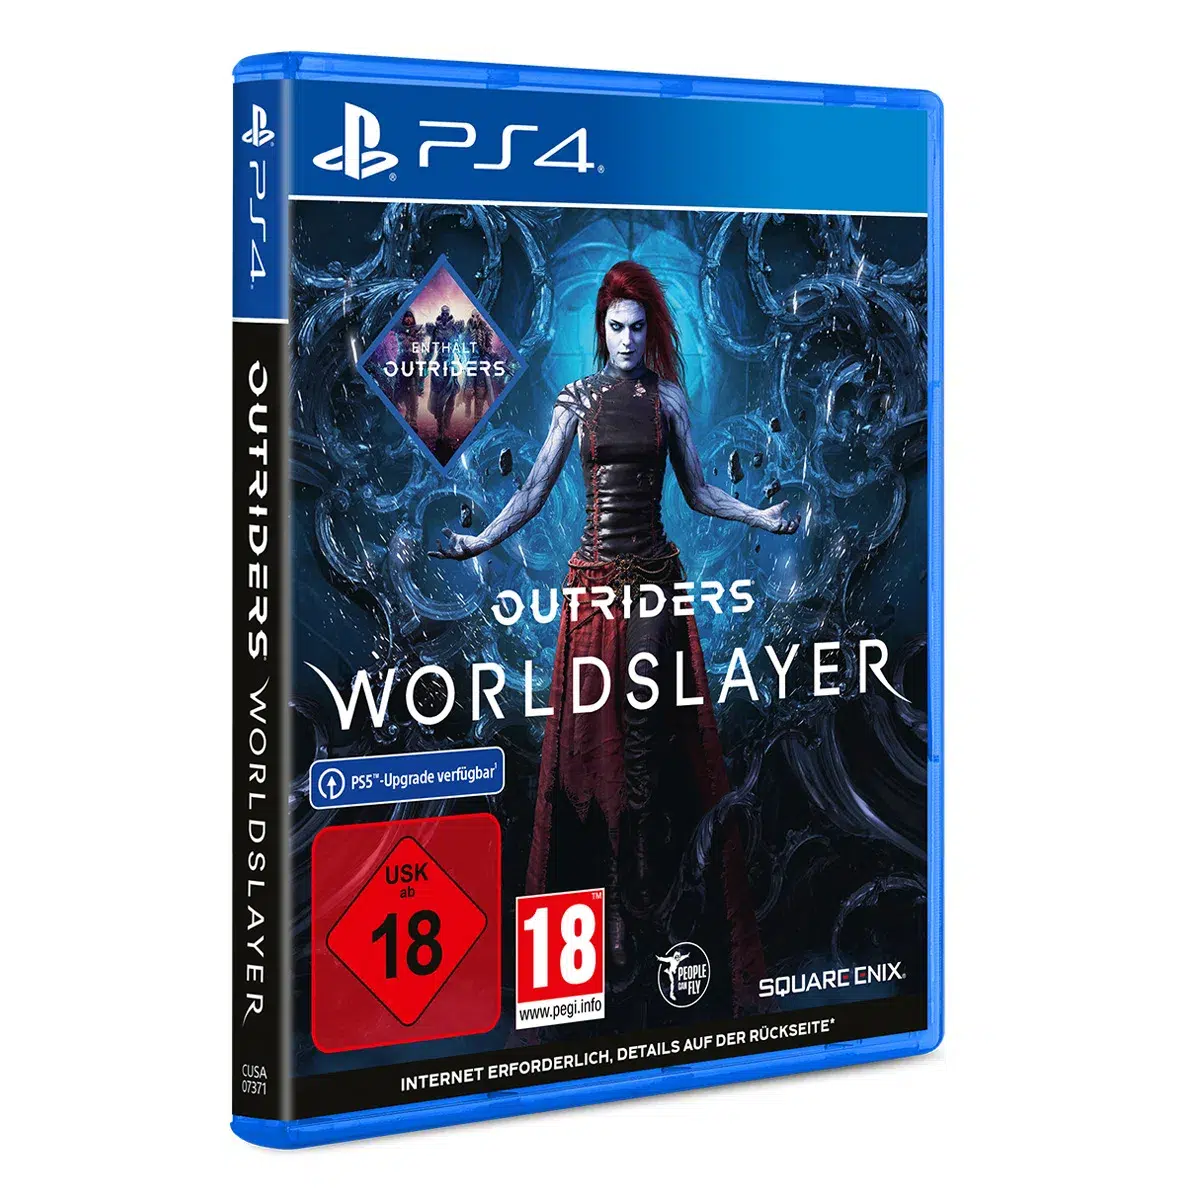 Outriders Worldslayer Edition (PS4) Image 2